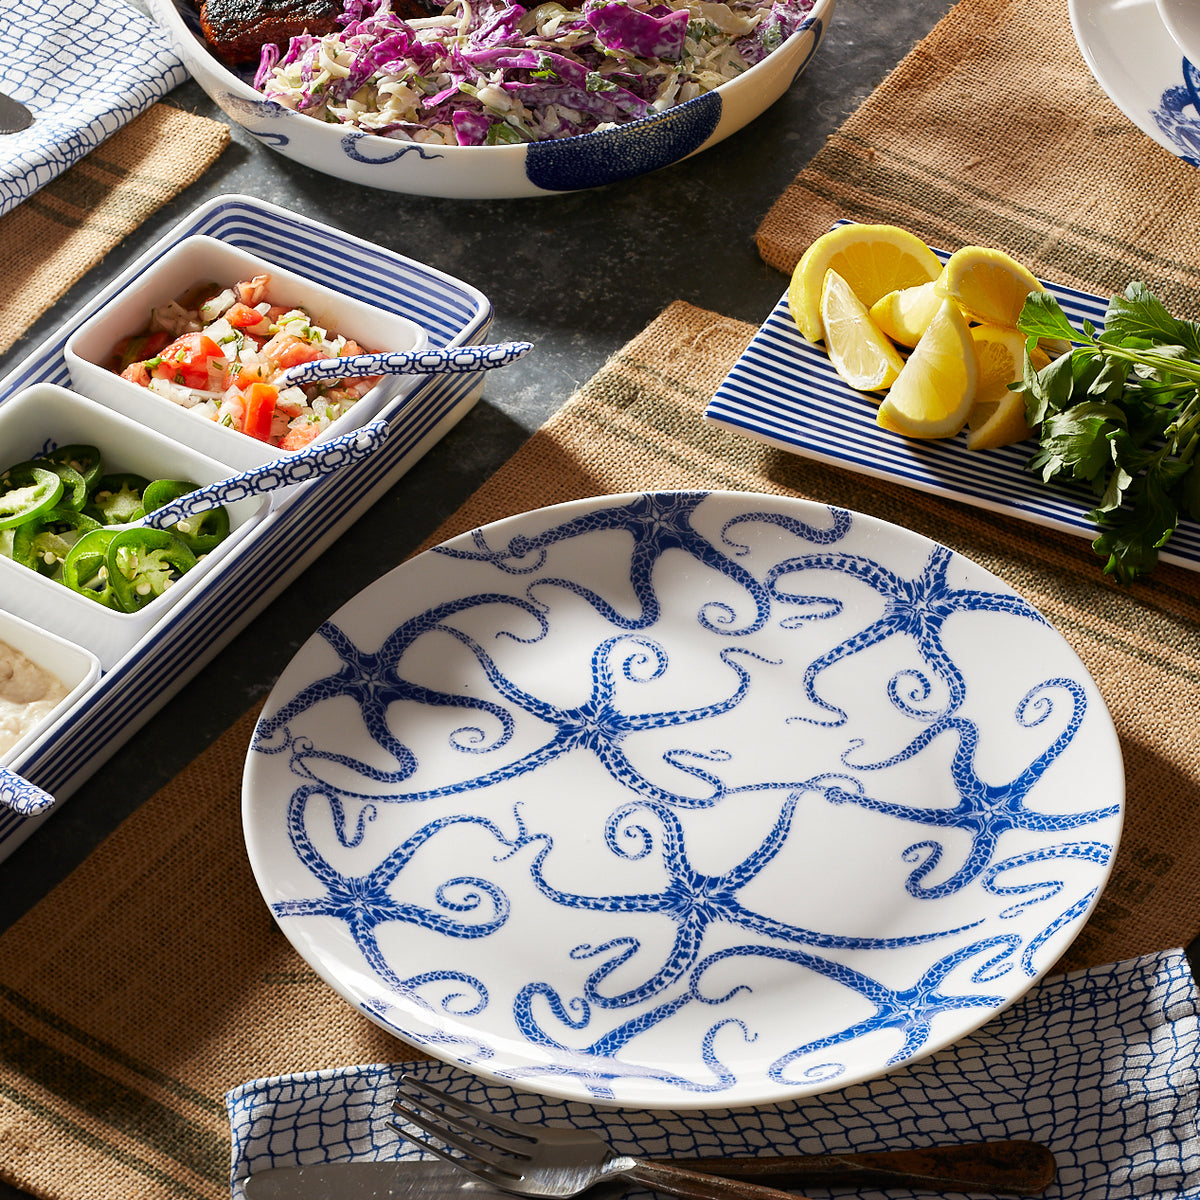 A table setting includes a Starfish Coupe Dinner Plate from Caskata Artisanal Home, a rectangular dish of lemon wedges and herbs, a bowl of salad, and a divided dish with various toppings, all on a burlap placemat. Adding to the charm are contemporary-shaped starfish accents subtly placed around the arrangement.